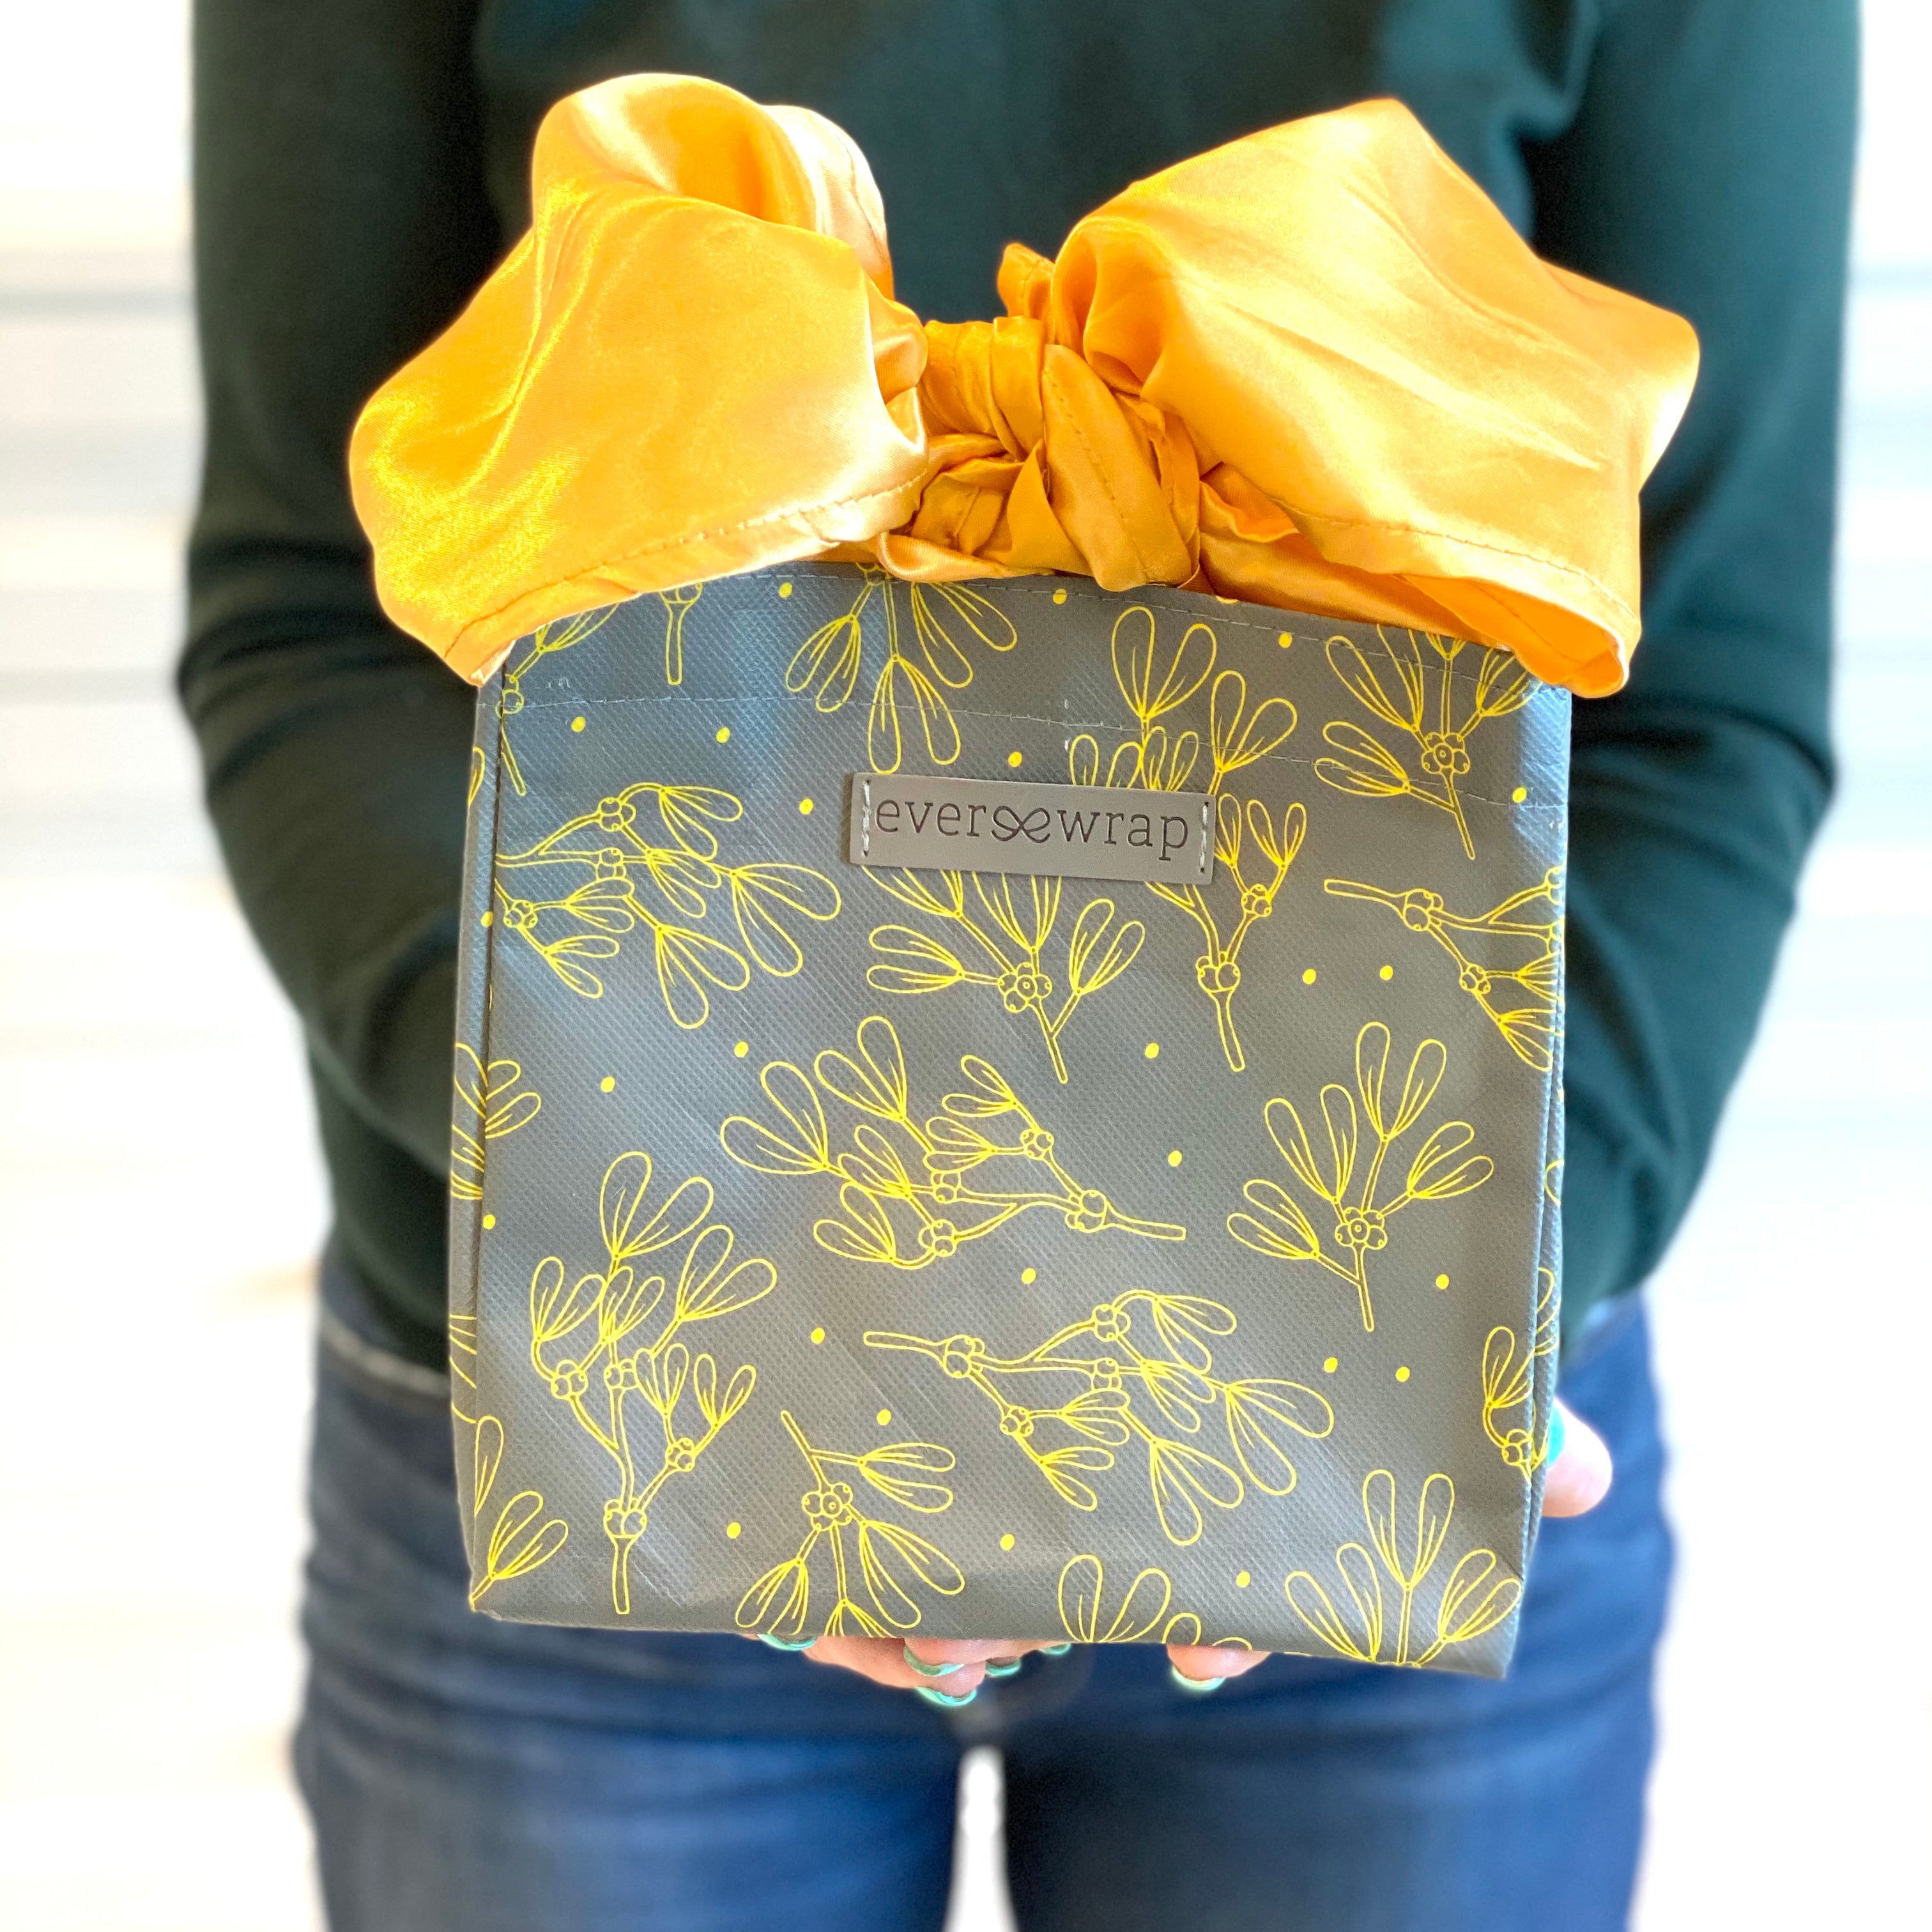 Buy Personalized Kraft Gift Bags Online in India - Etsy